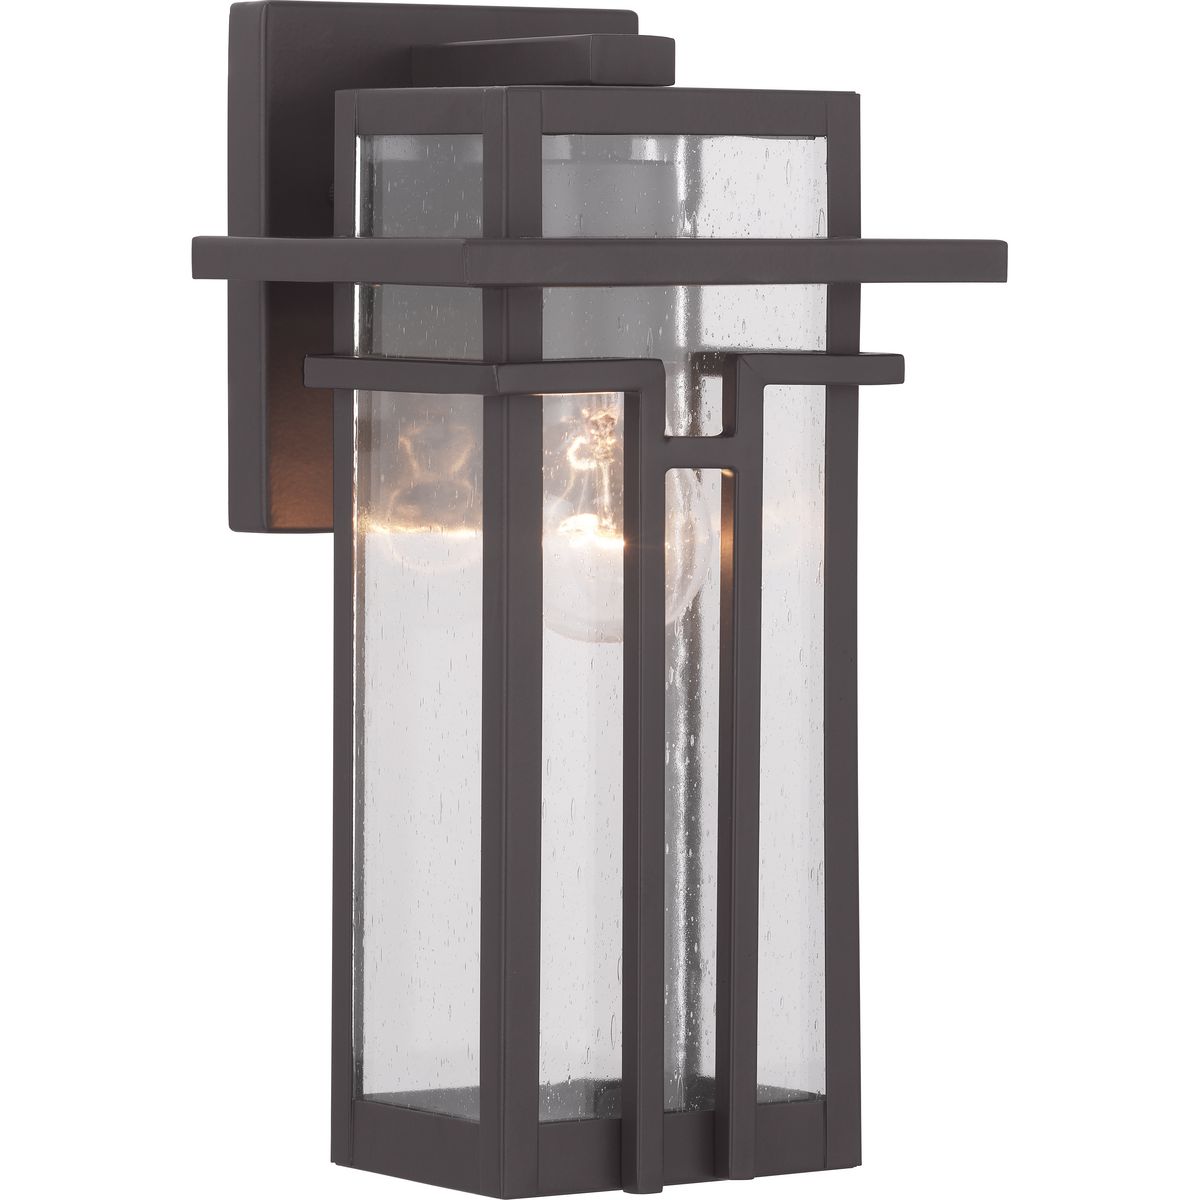 Geometric details in Boxwood�s design enhance Craftsman-inspired architecture. The one-light small wall lantern features clear seeded glass and finished in Architectural Bronze which completes the authentic style.